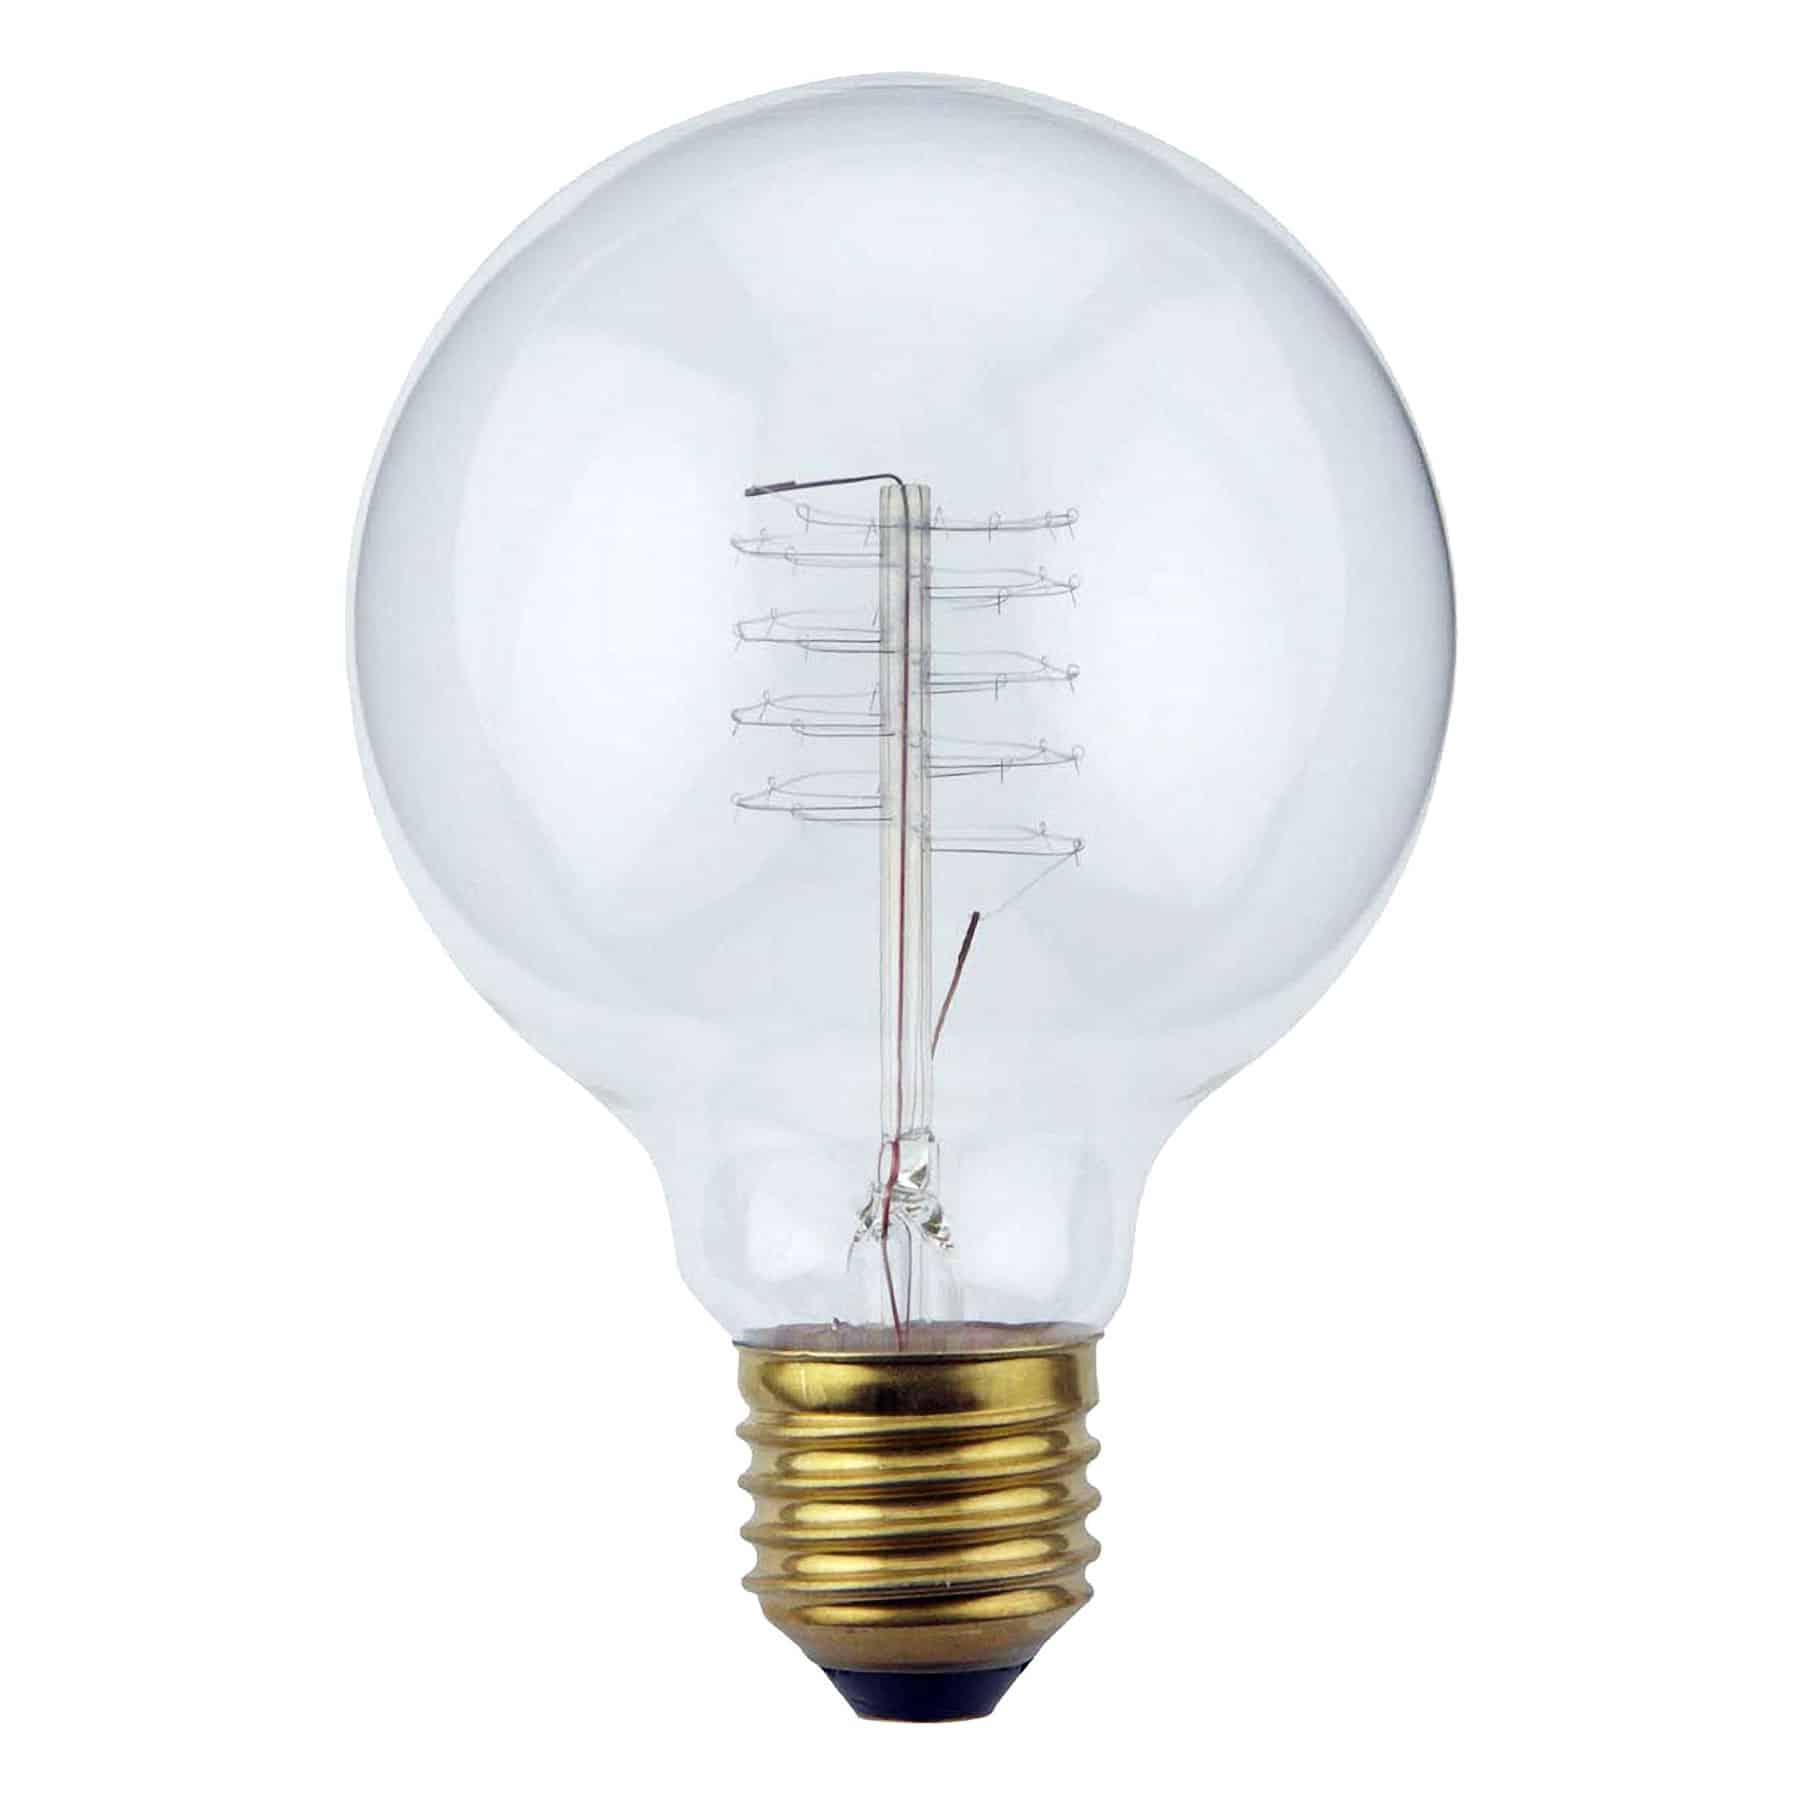 What are the Different Sizes of Light Bulbs? A Light Bulb Size Chart & Series Guide